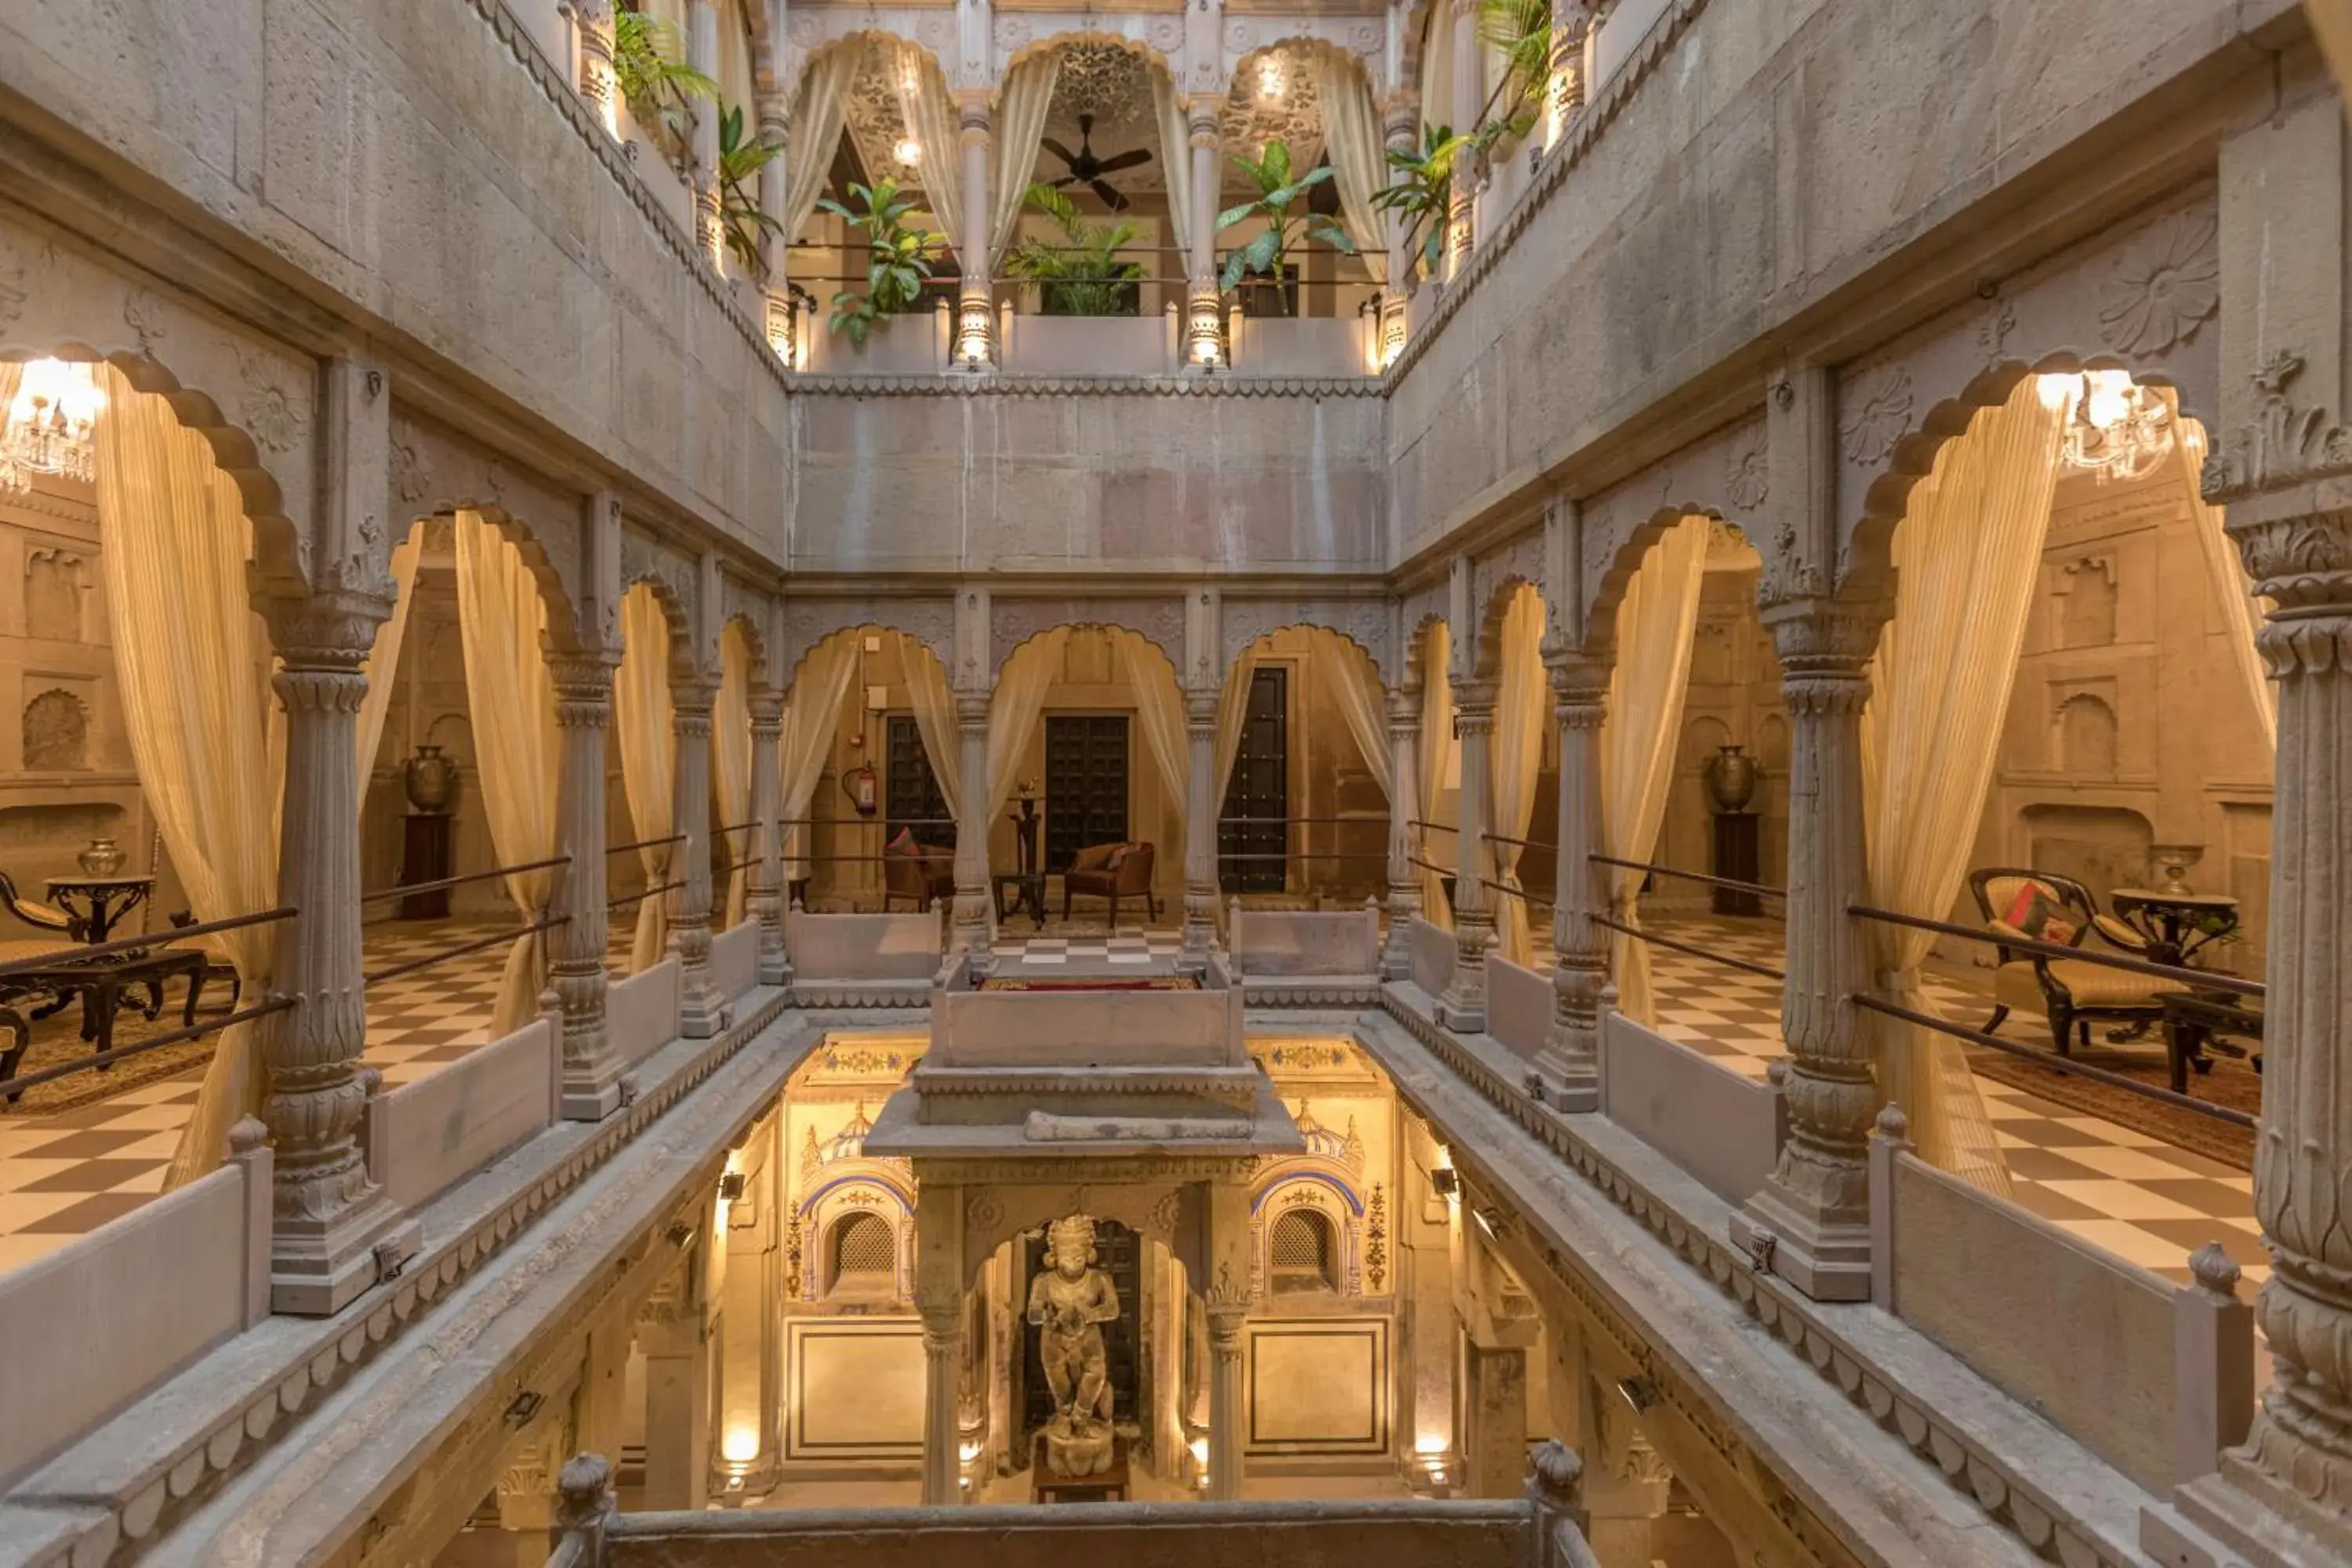 Lobby or reception in BrijRama Palace, Varanasi by the Ganges